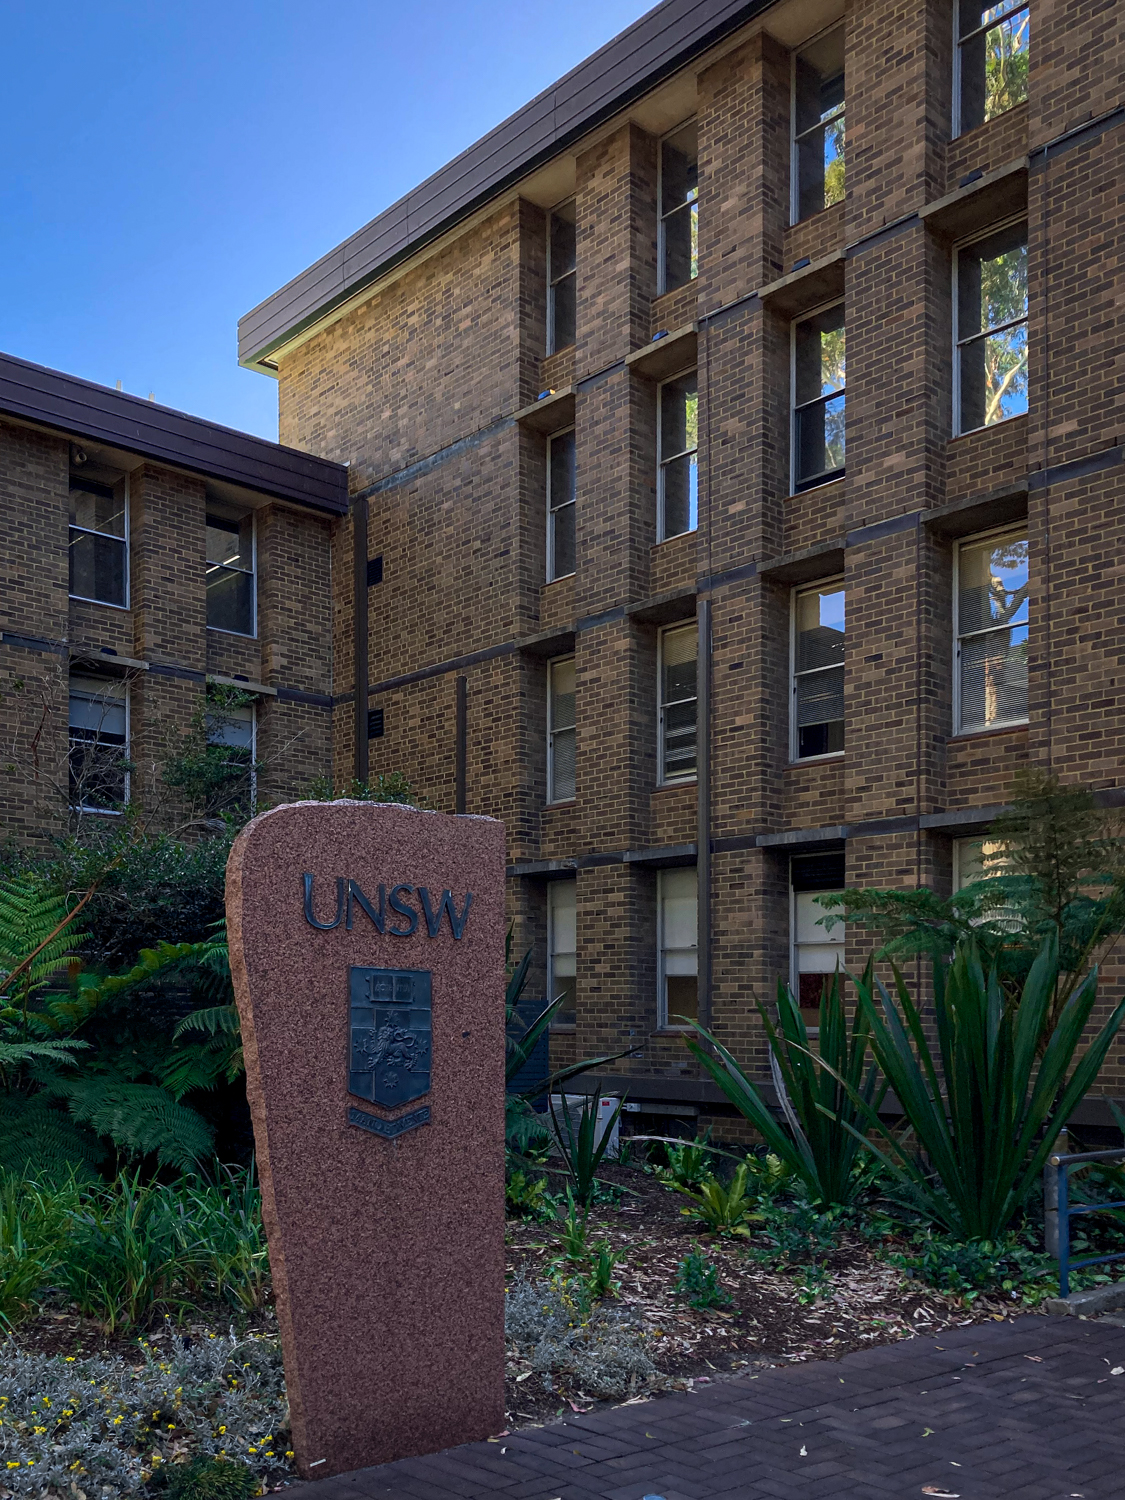 A large monolith with UNSW logo outside a four-storey brown brick building